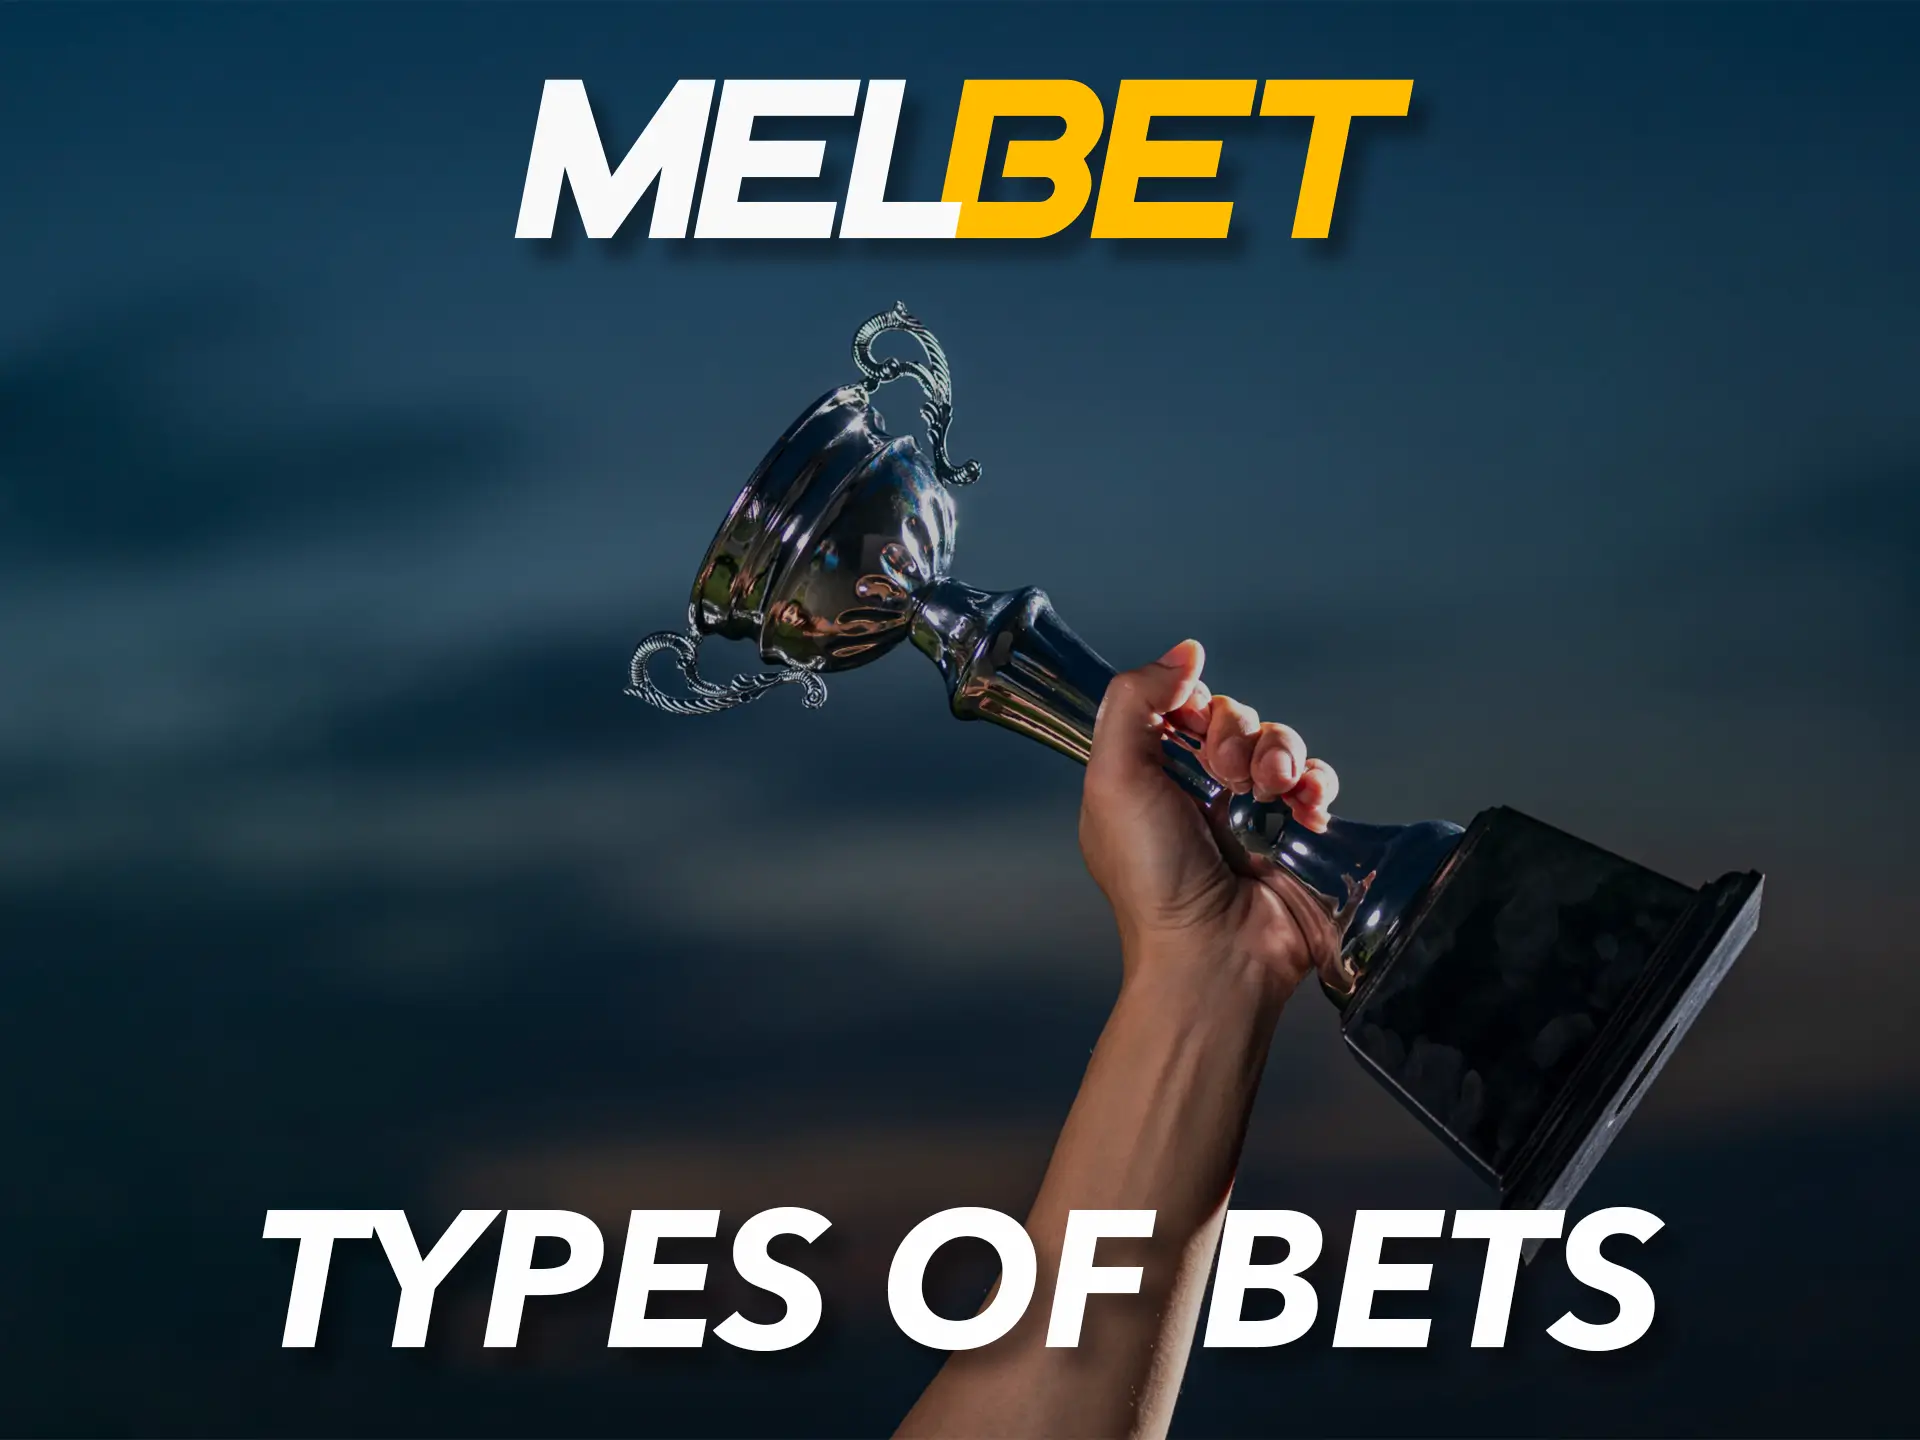 Familiarise yourself with the types of bets at Melbet Casino.